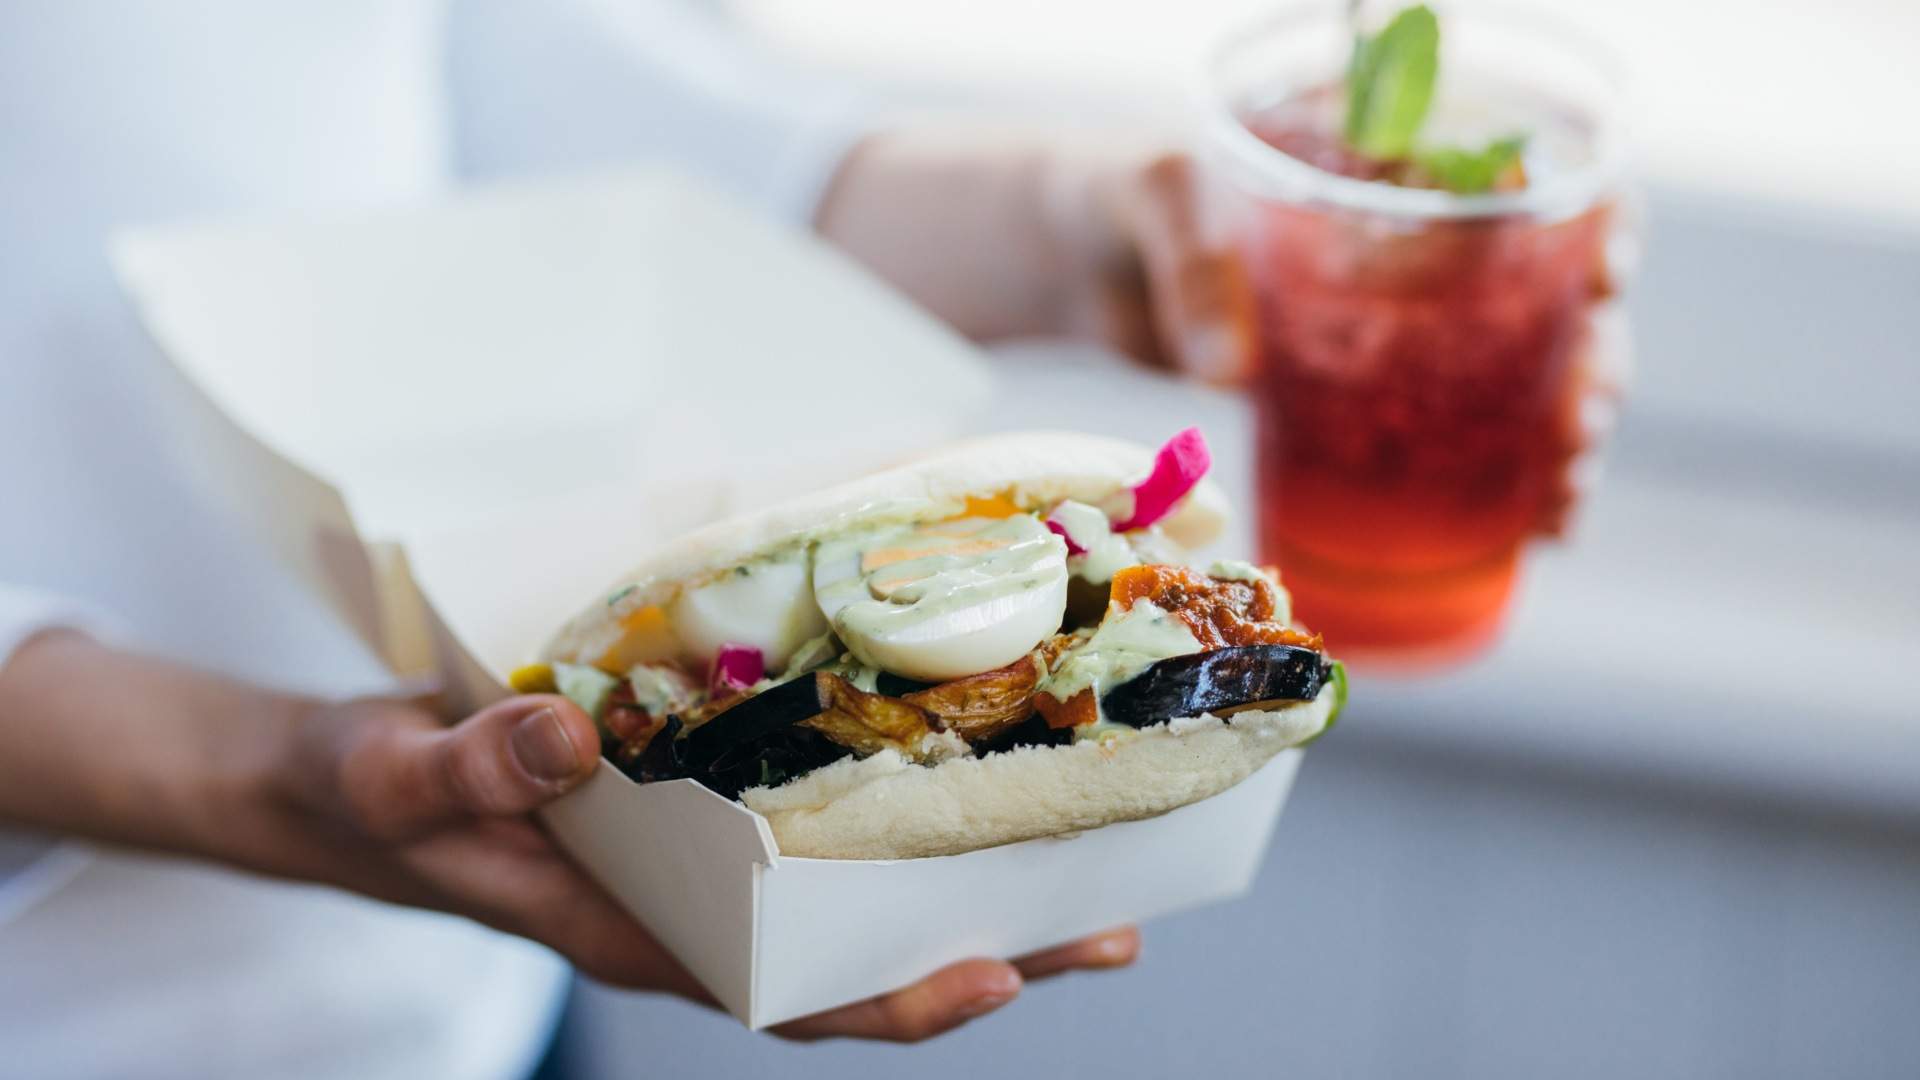 Pocket Pita Is the New Israeli Street Food Diner That's Popped Up on the Lower North Shore